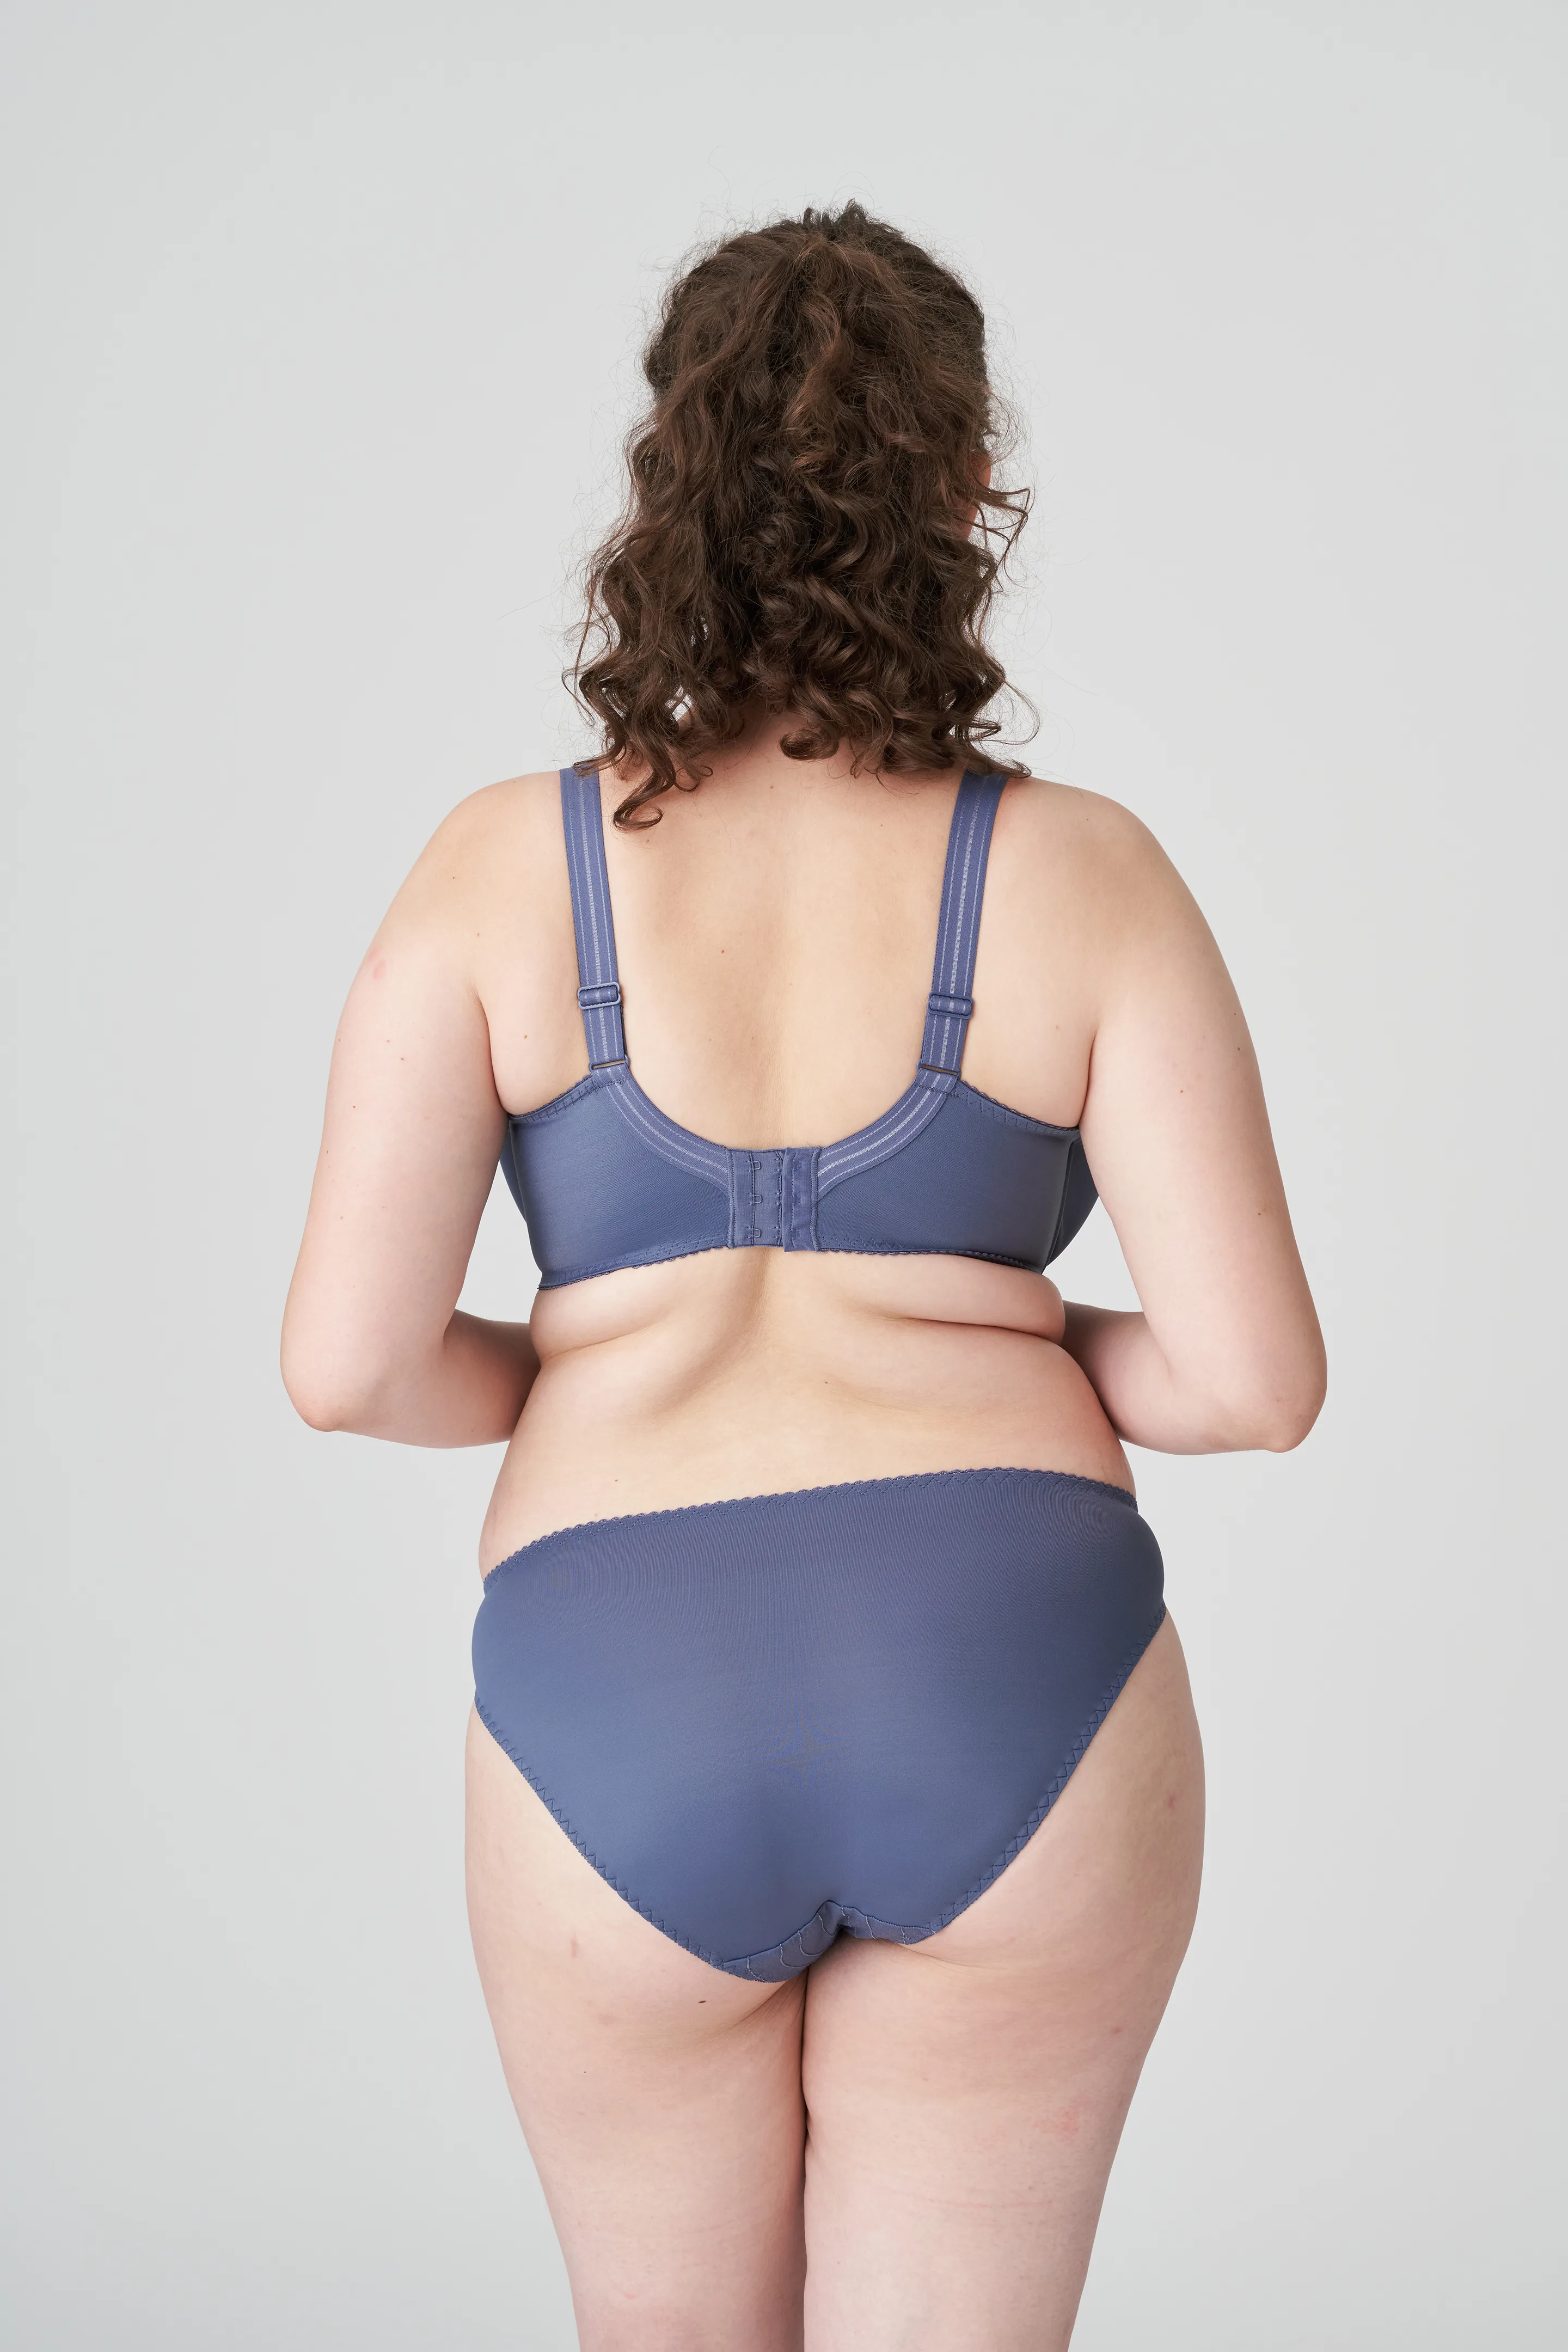 PrimaDonna Deauville 0161810/11 Women's Nightshadow Blue Full Cup Bra 30F :  PrimaDonna: : Clothing, Shoes & Accessories